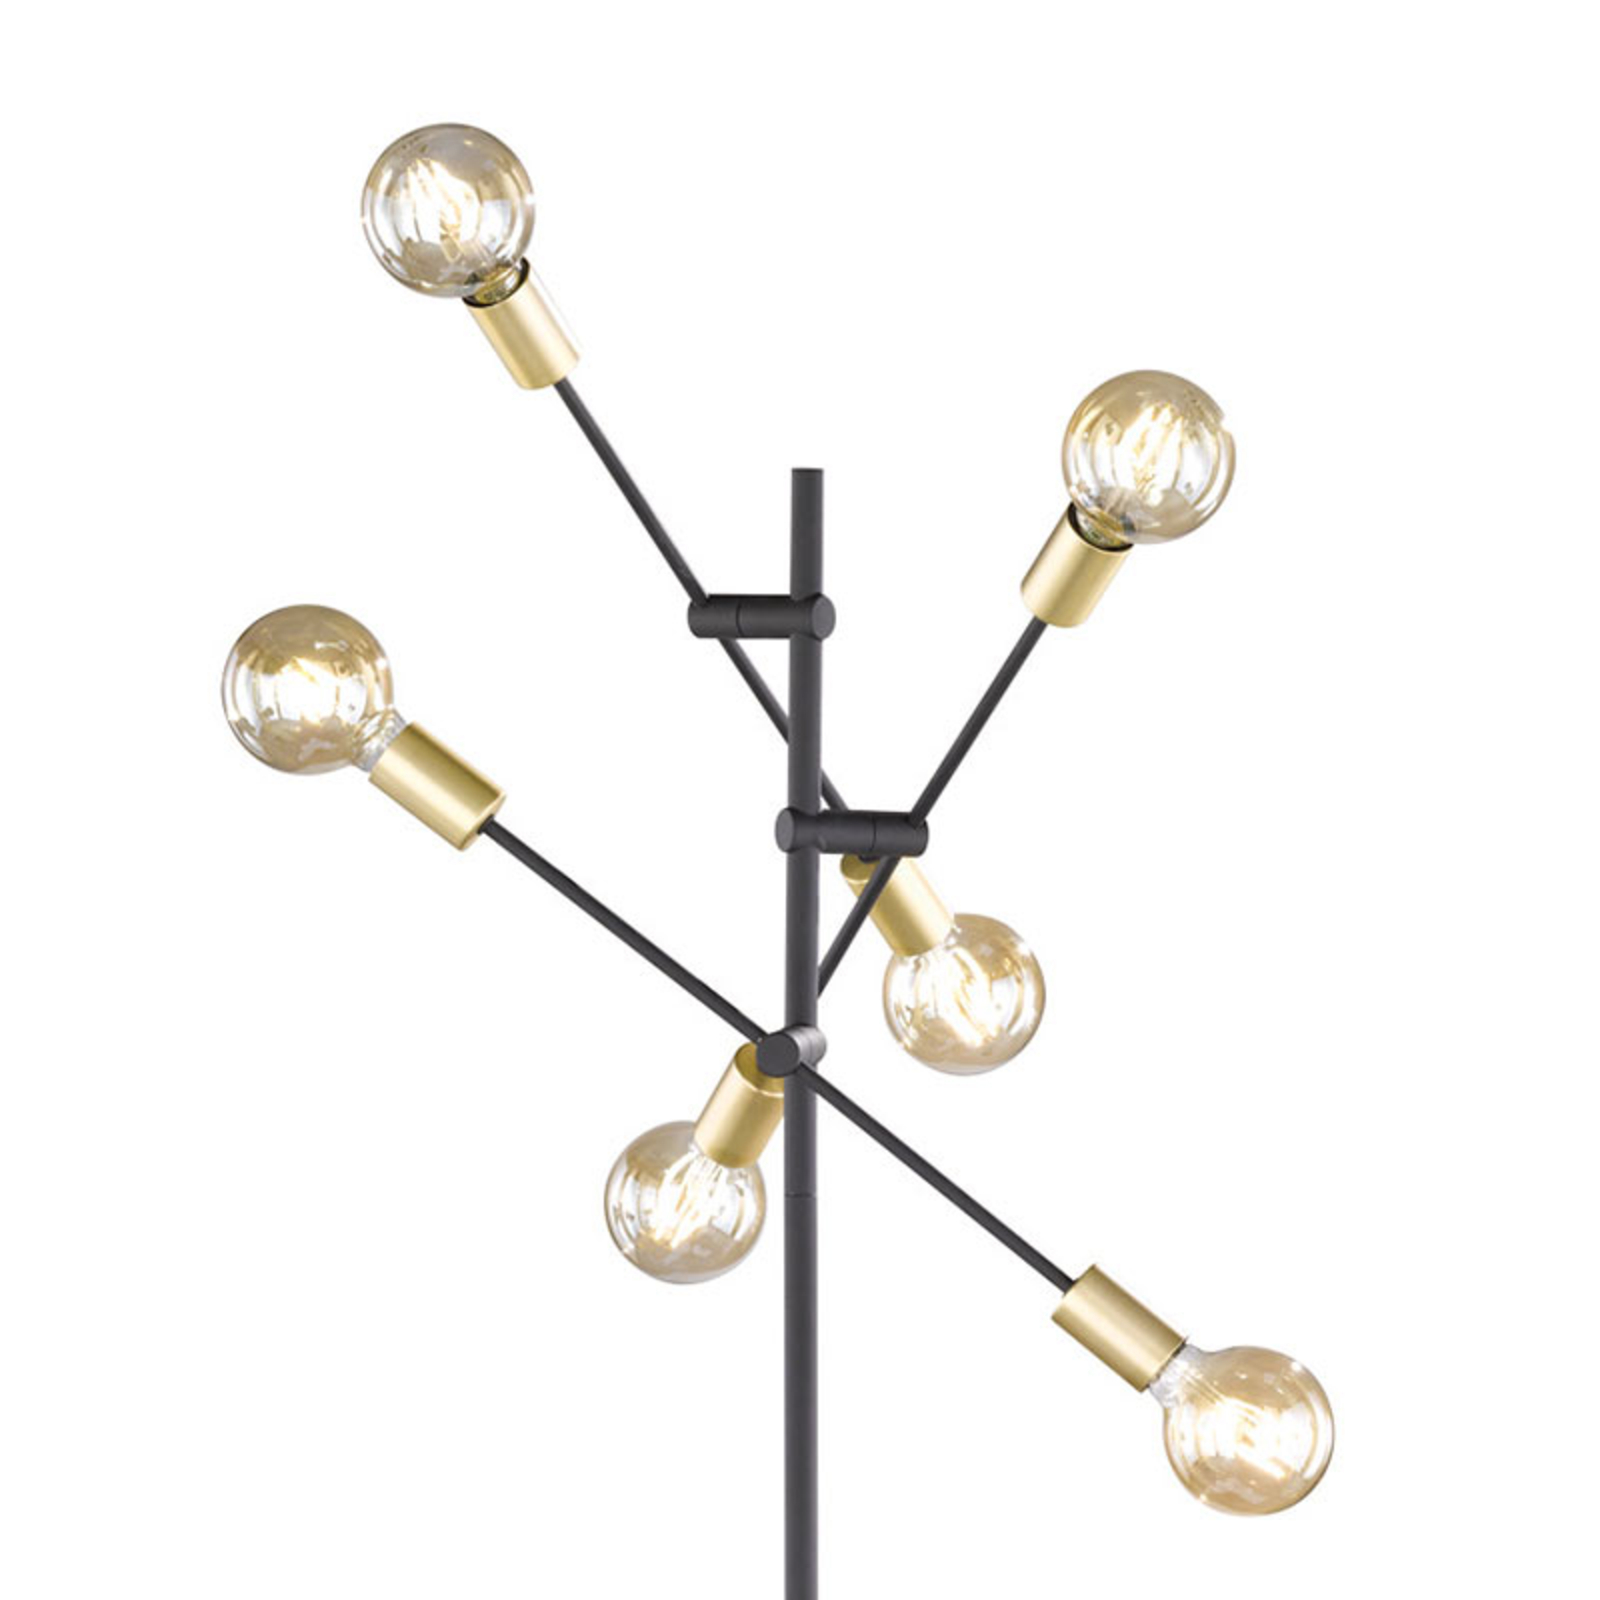 Floor lamp Cross with a black-gold design